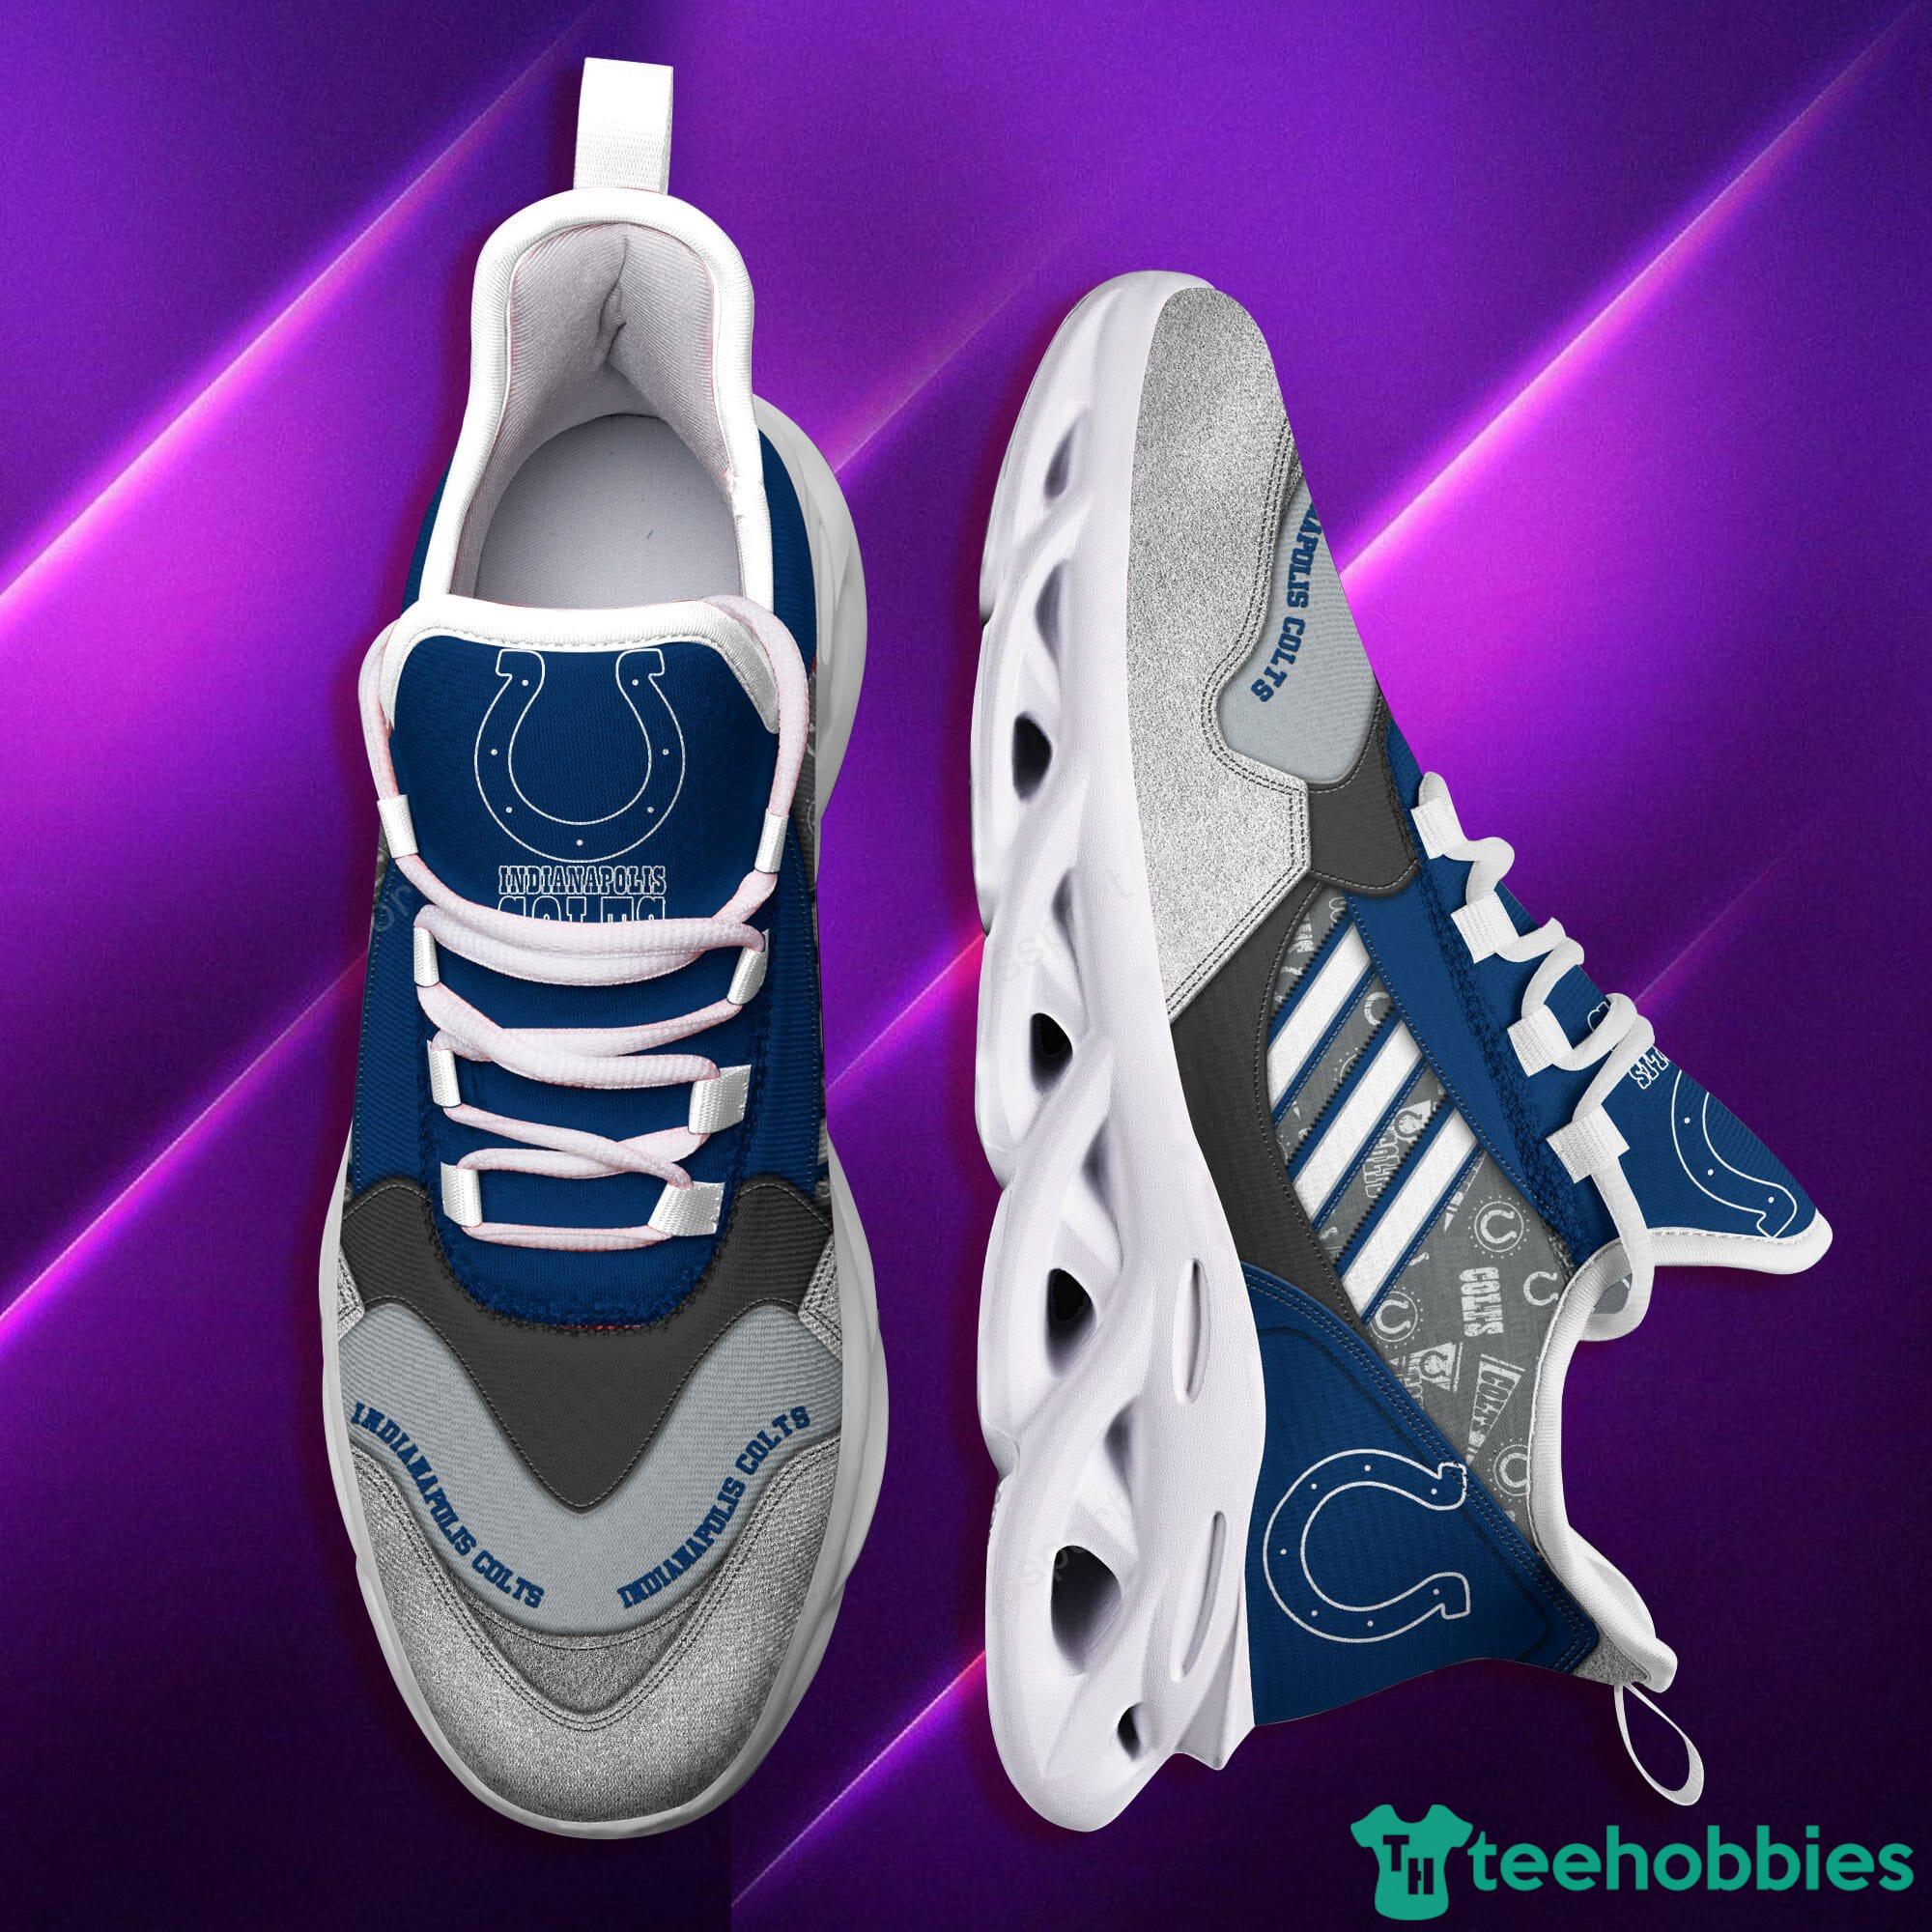 Indianapolis Colts NFL Max Soul Sneakers Sport Shoes Product Photo 1